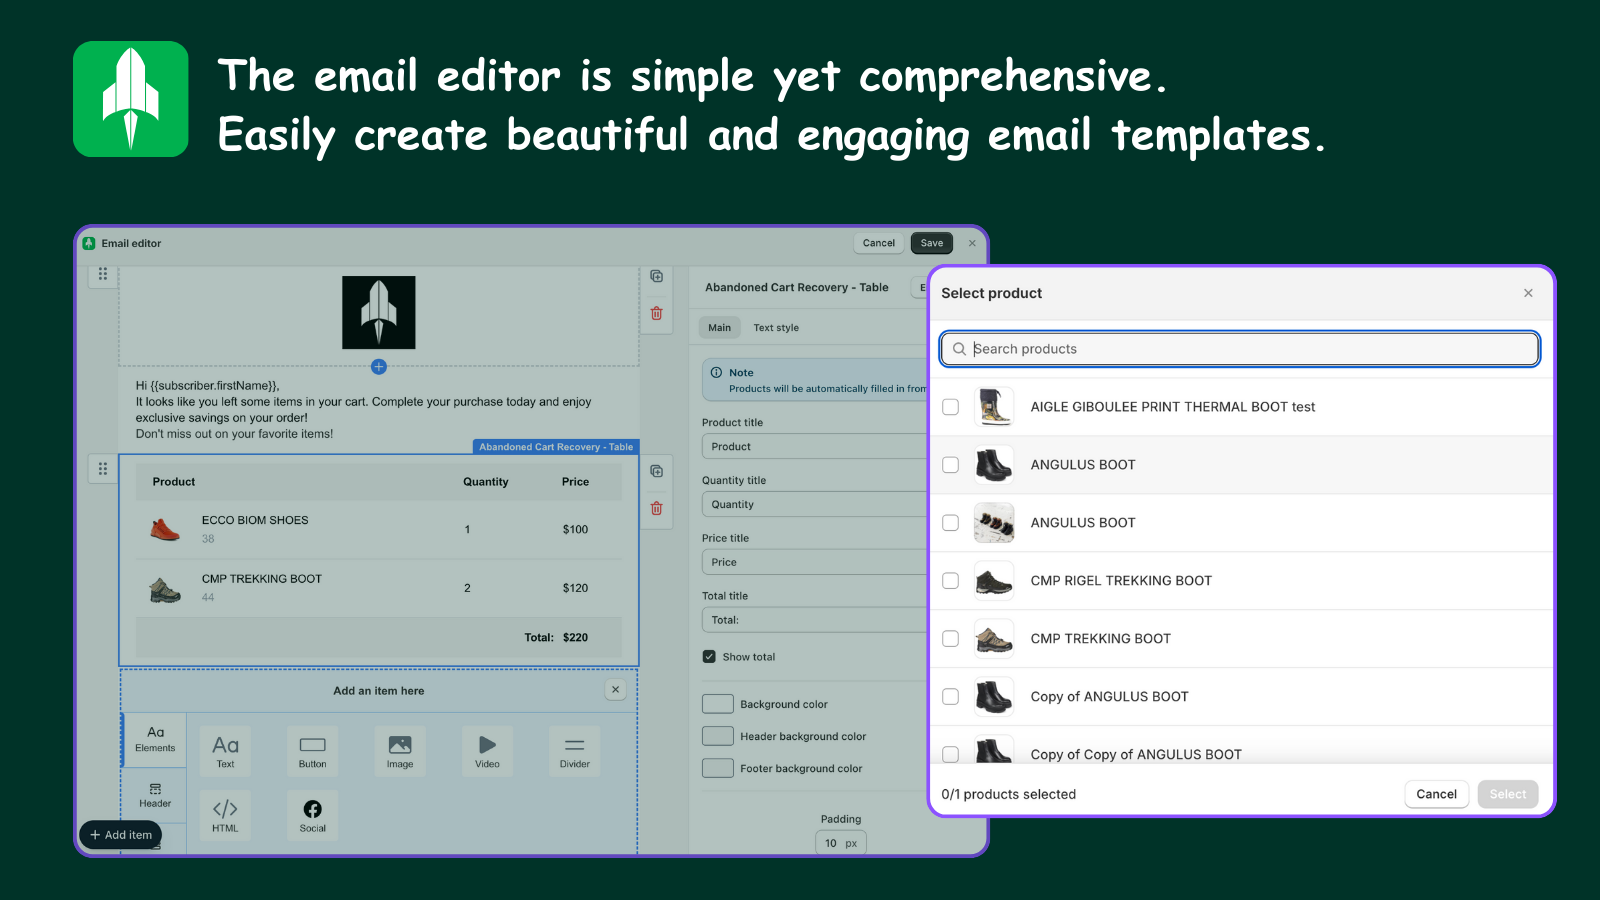 The email editor is simple yet comprehensive.